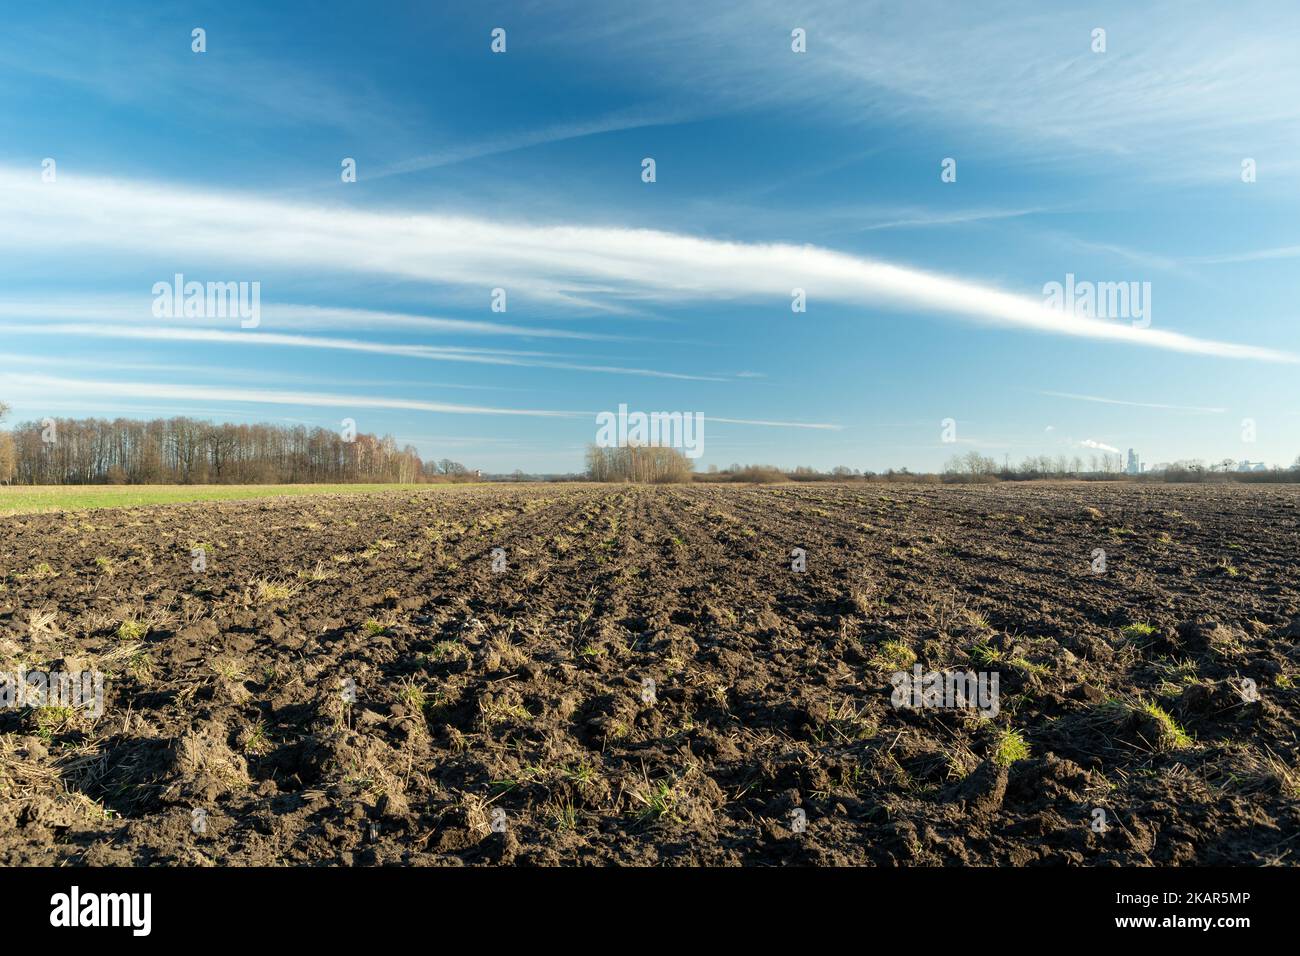 Plowed field and white clouds on a sky in eastern Poland Stock Photo